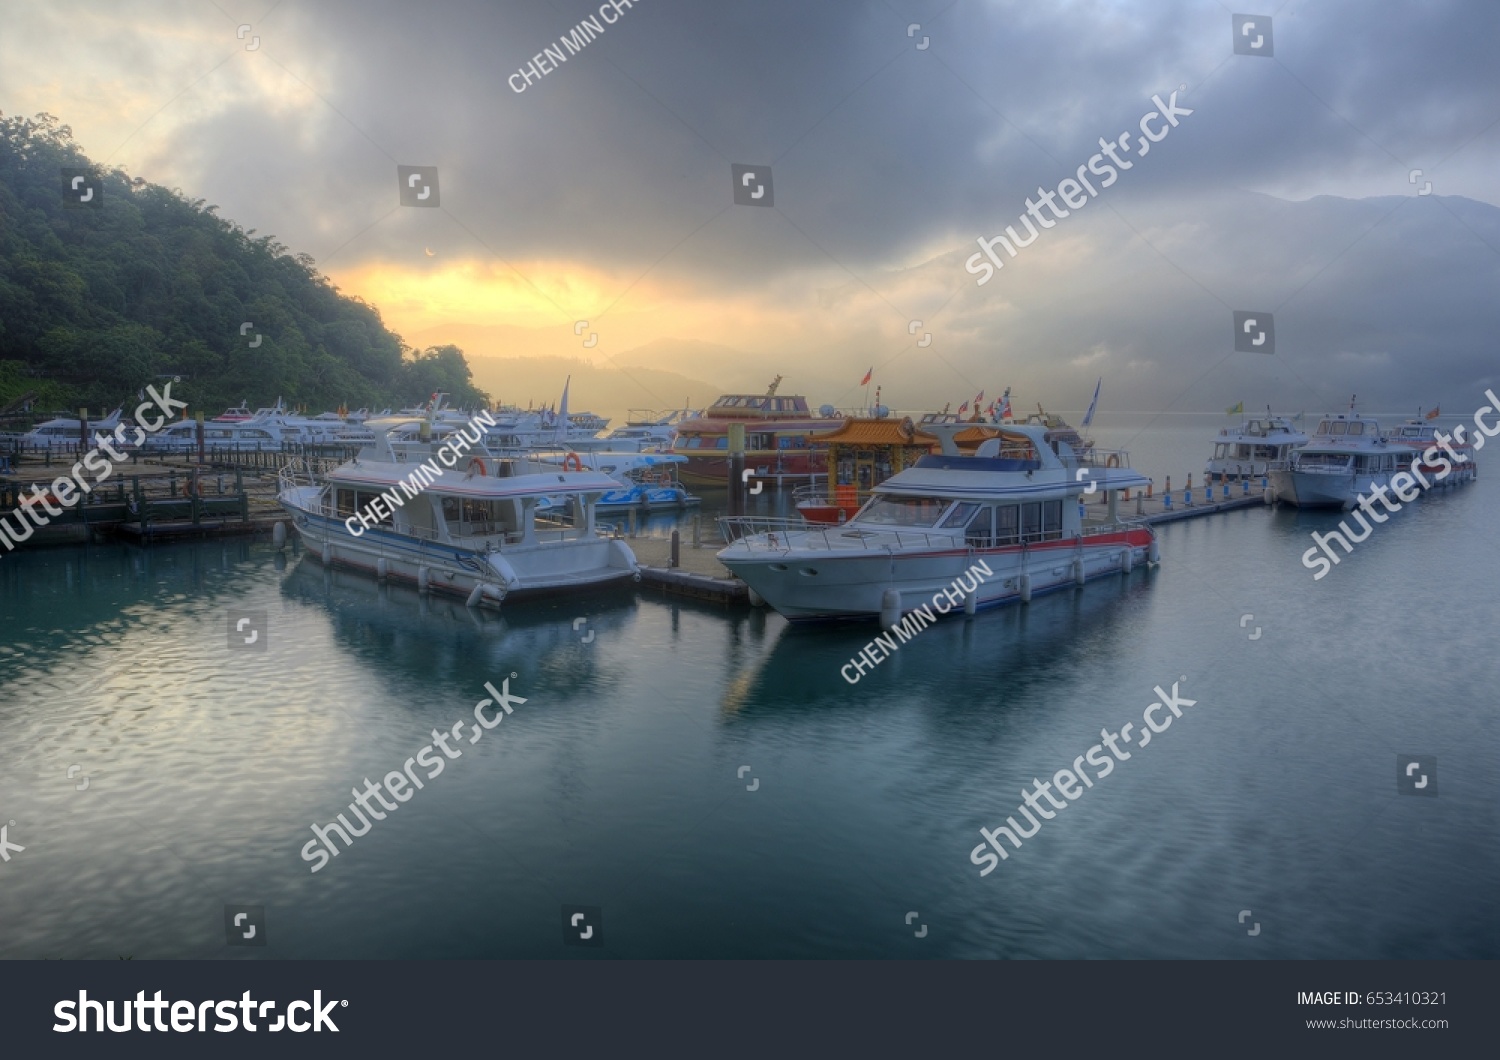 Tourist boats moored to the docks during partial solar eclipse at Shuishe Pier of Sun-Moon Lake in Nantou, Taiwan, with golden sun light shining through moody cloudy sky reflected on peaceful water #653410321